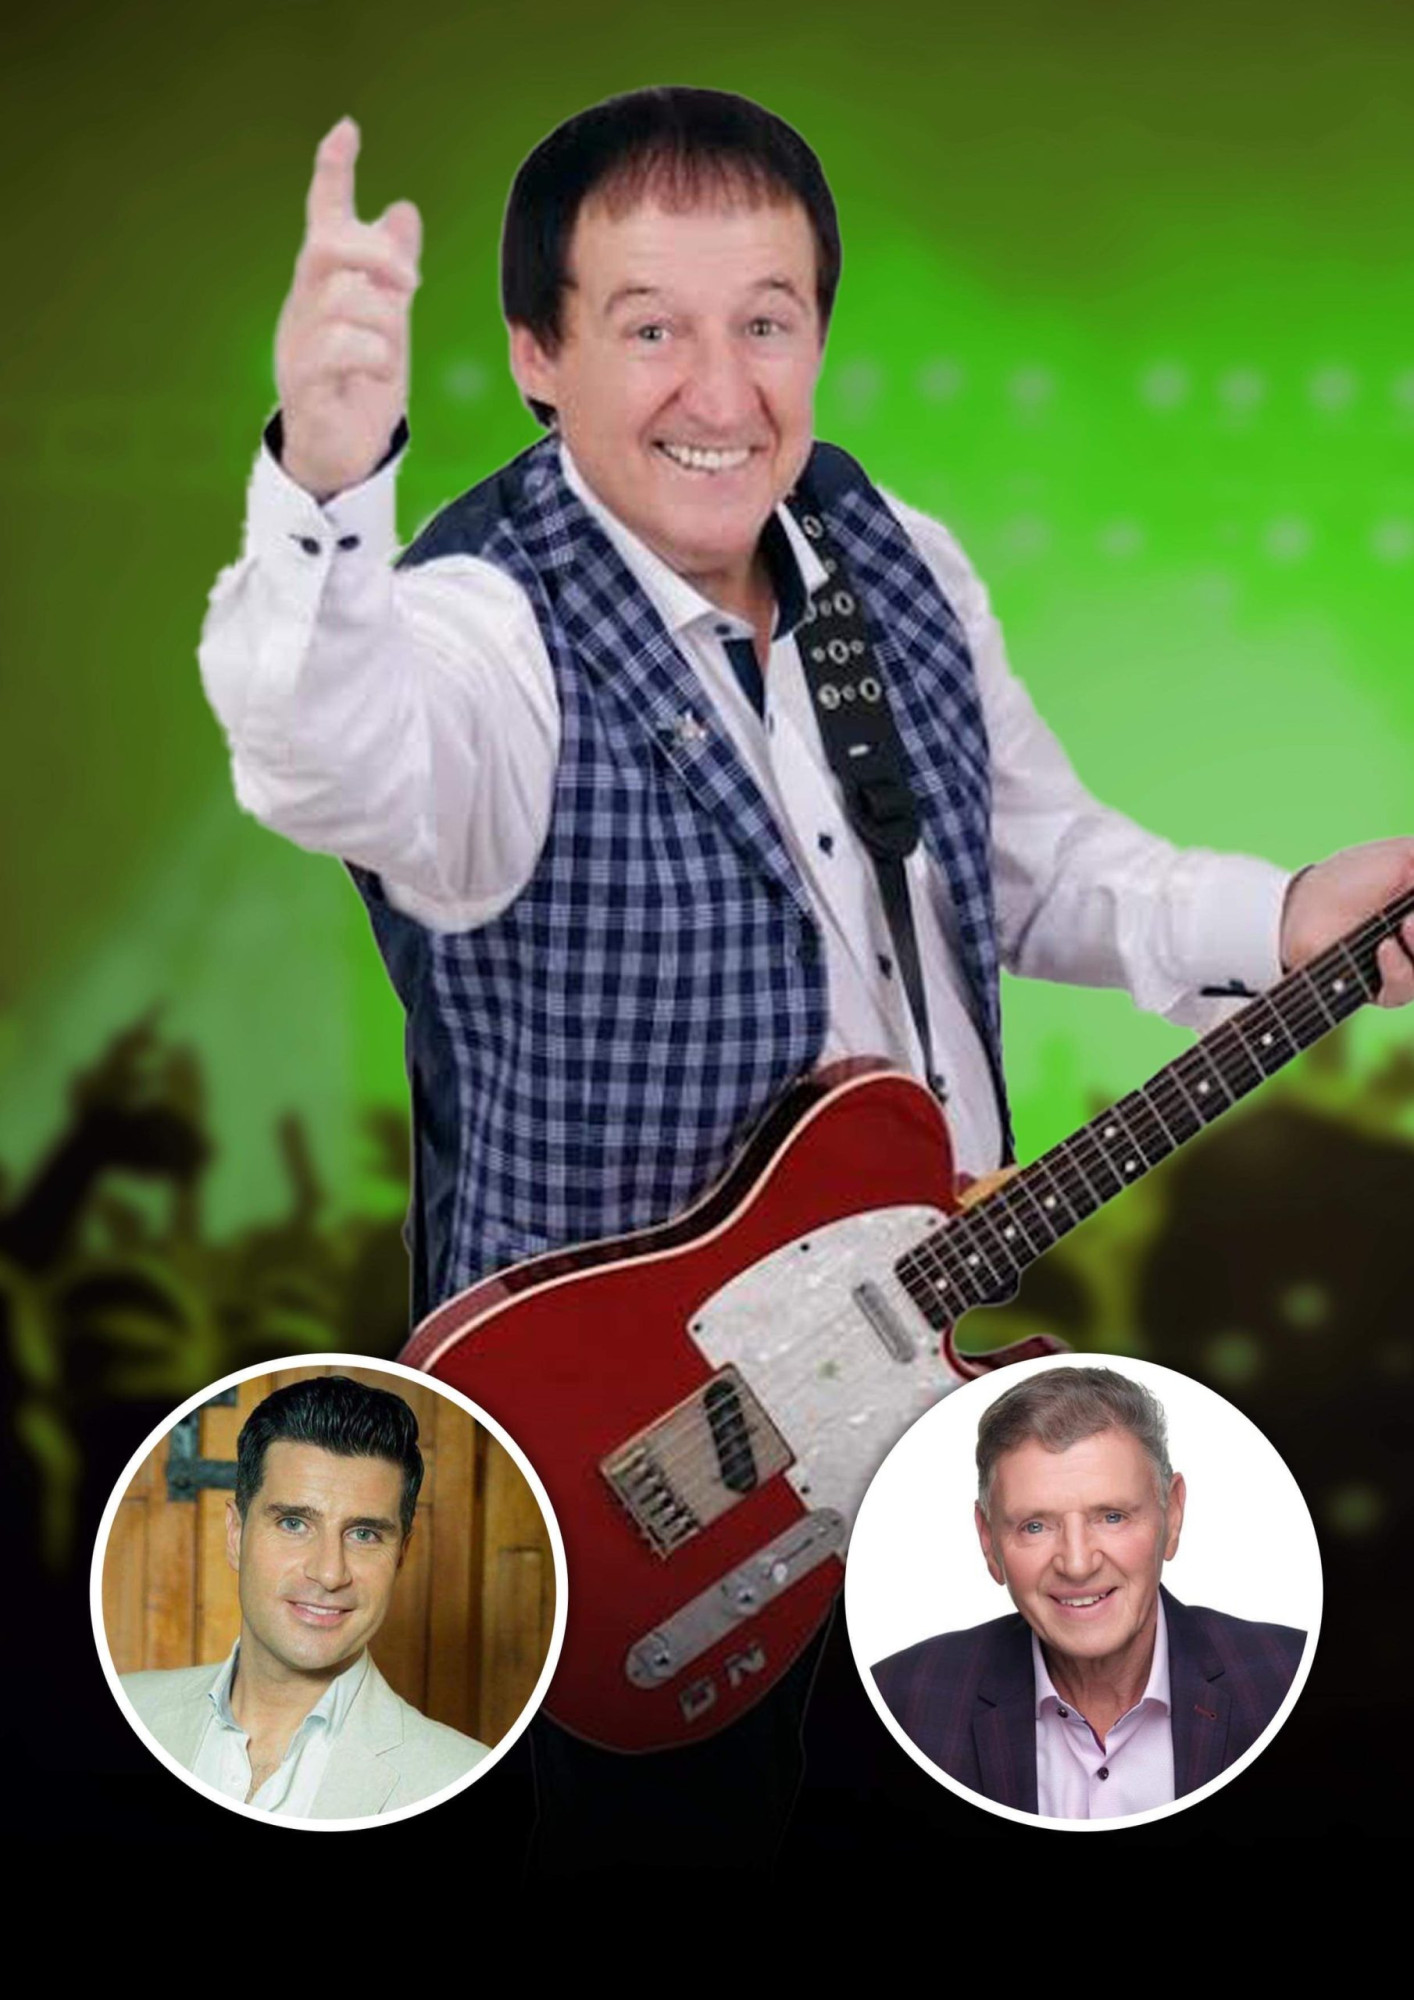 Declan Nerney live in concert with guests John McNicholl and John Hogan